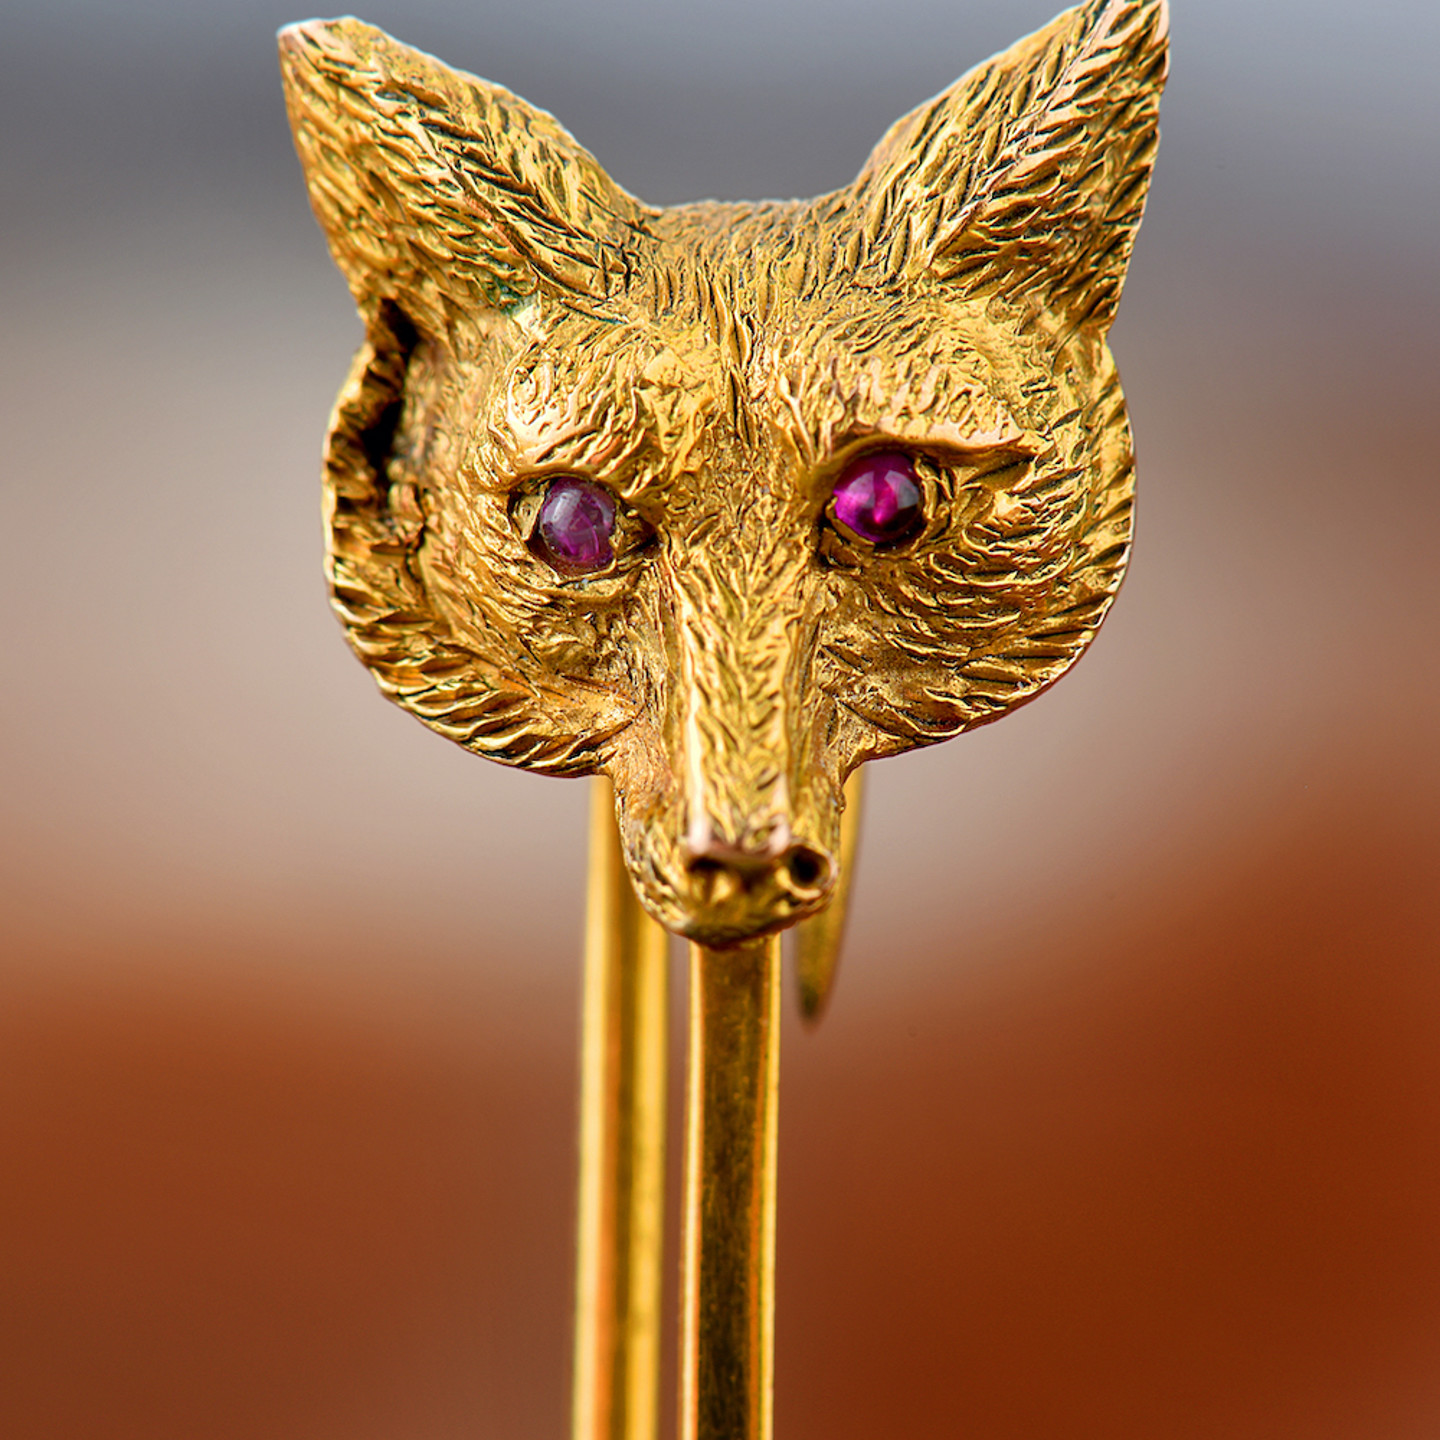 Edwardian 15Ct Gold Brooch In The Form Of A Fox. Sold For £300